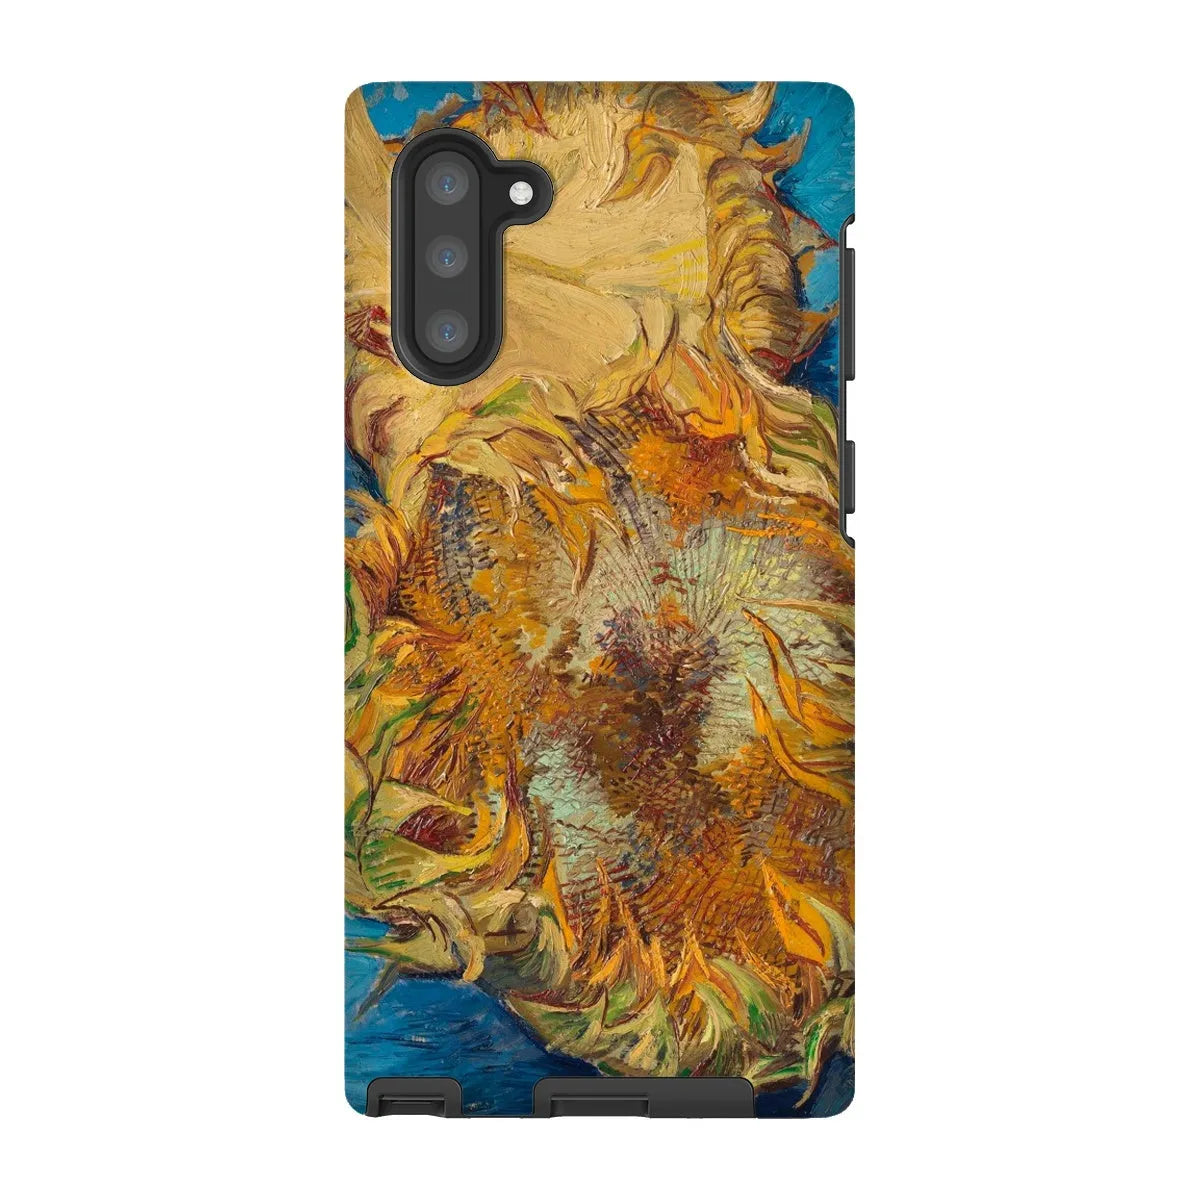 Sunflowers - Post Impressionist Phone Case - Vincent Van Gogh - Samsung Galaxy Note 10 / Matte - Mobile Phone Cases